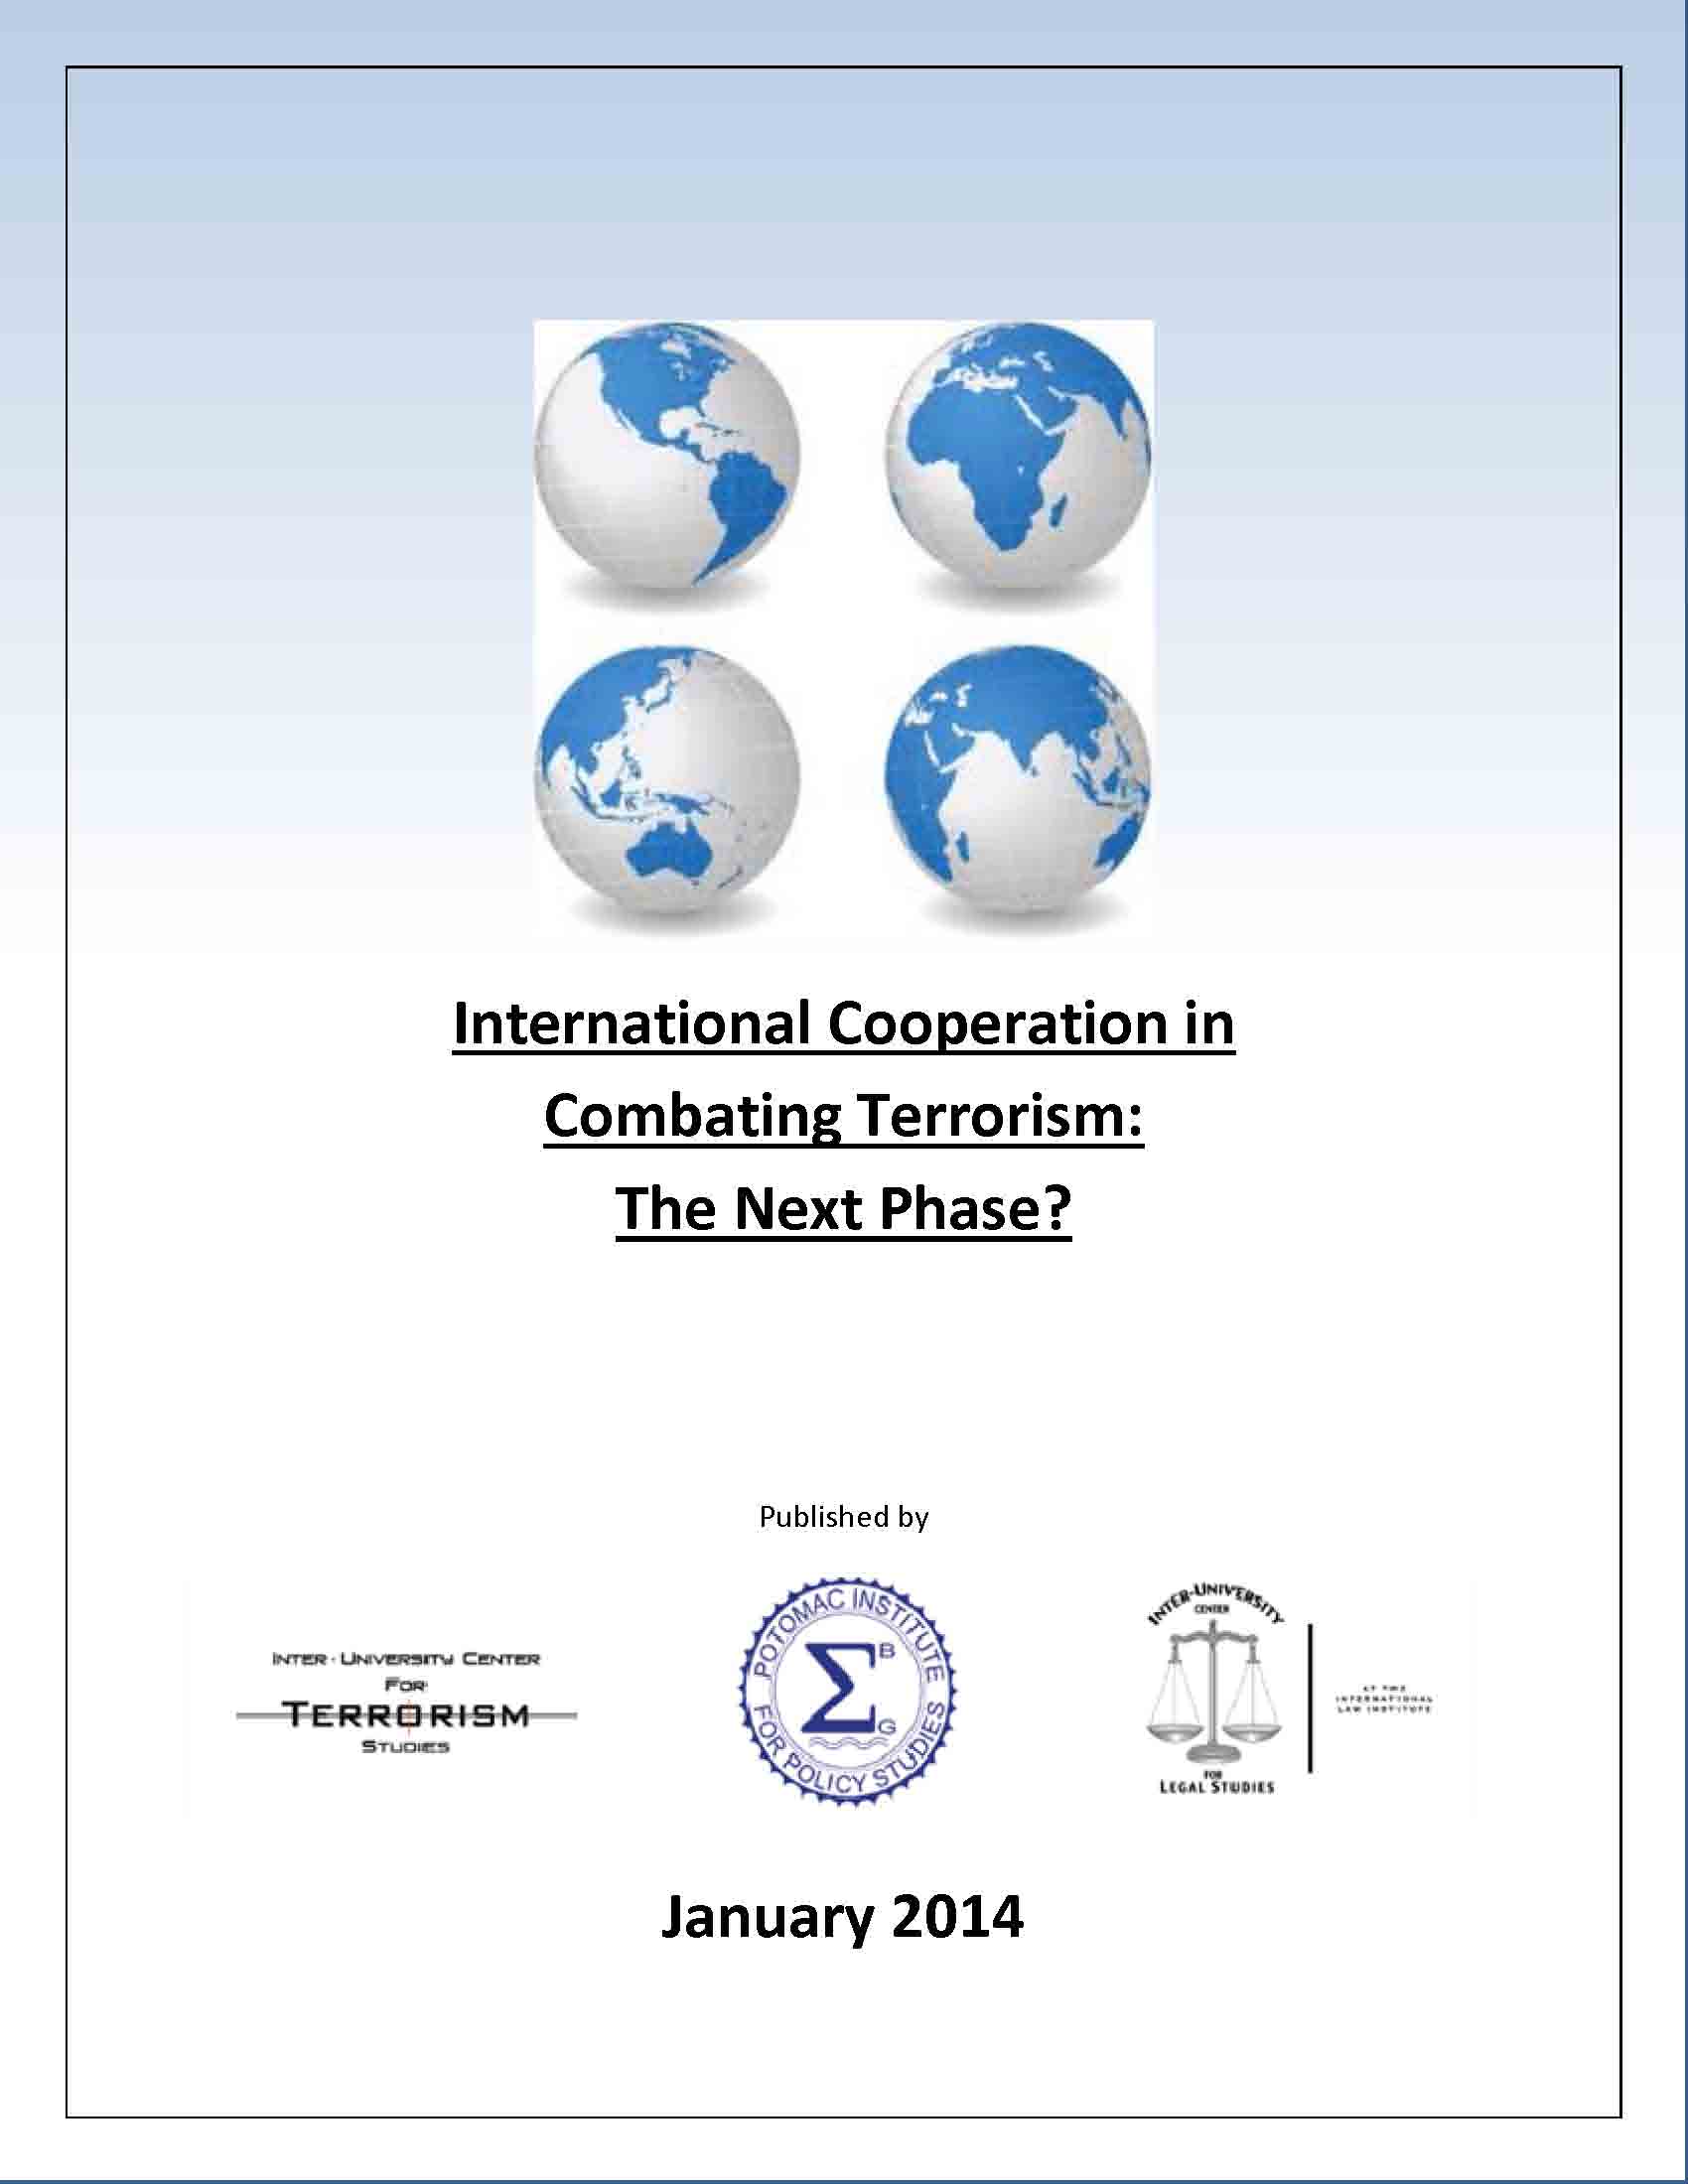 International Cooperation in Combating Terrorism: The Next Phase?